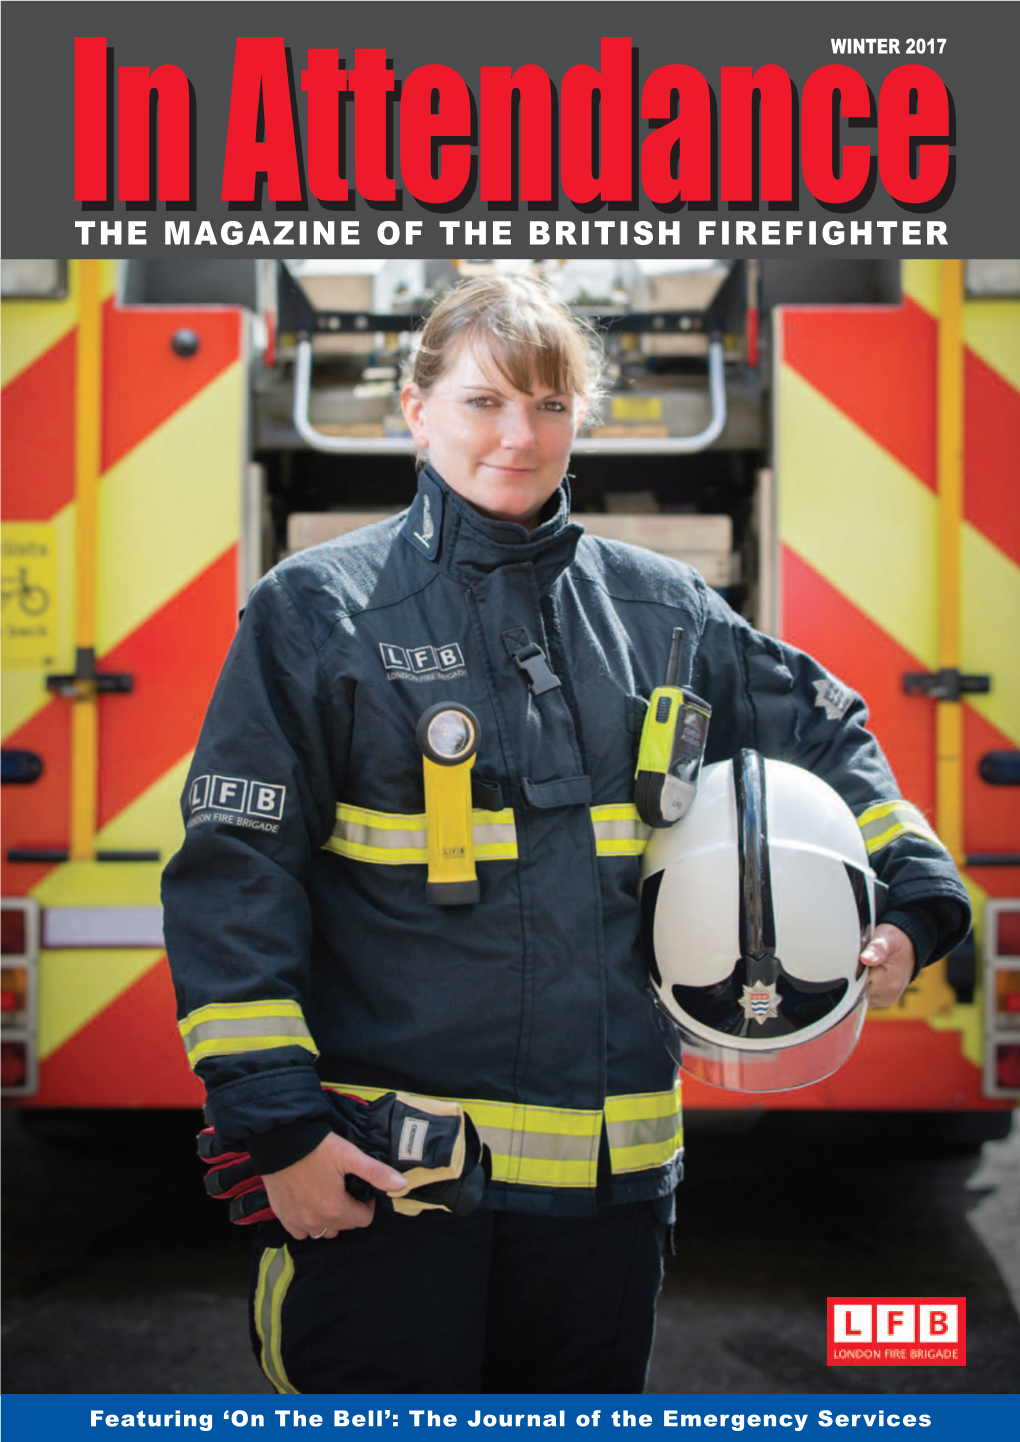 The Magazine of the British Firefighter